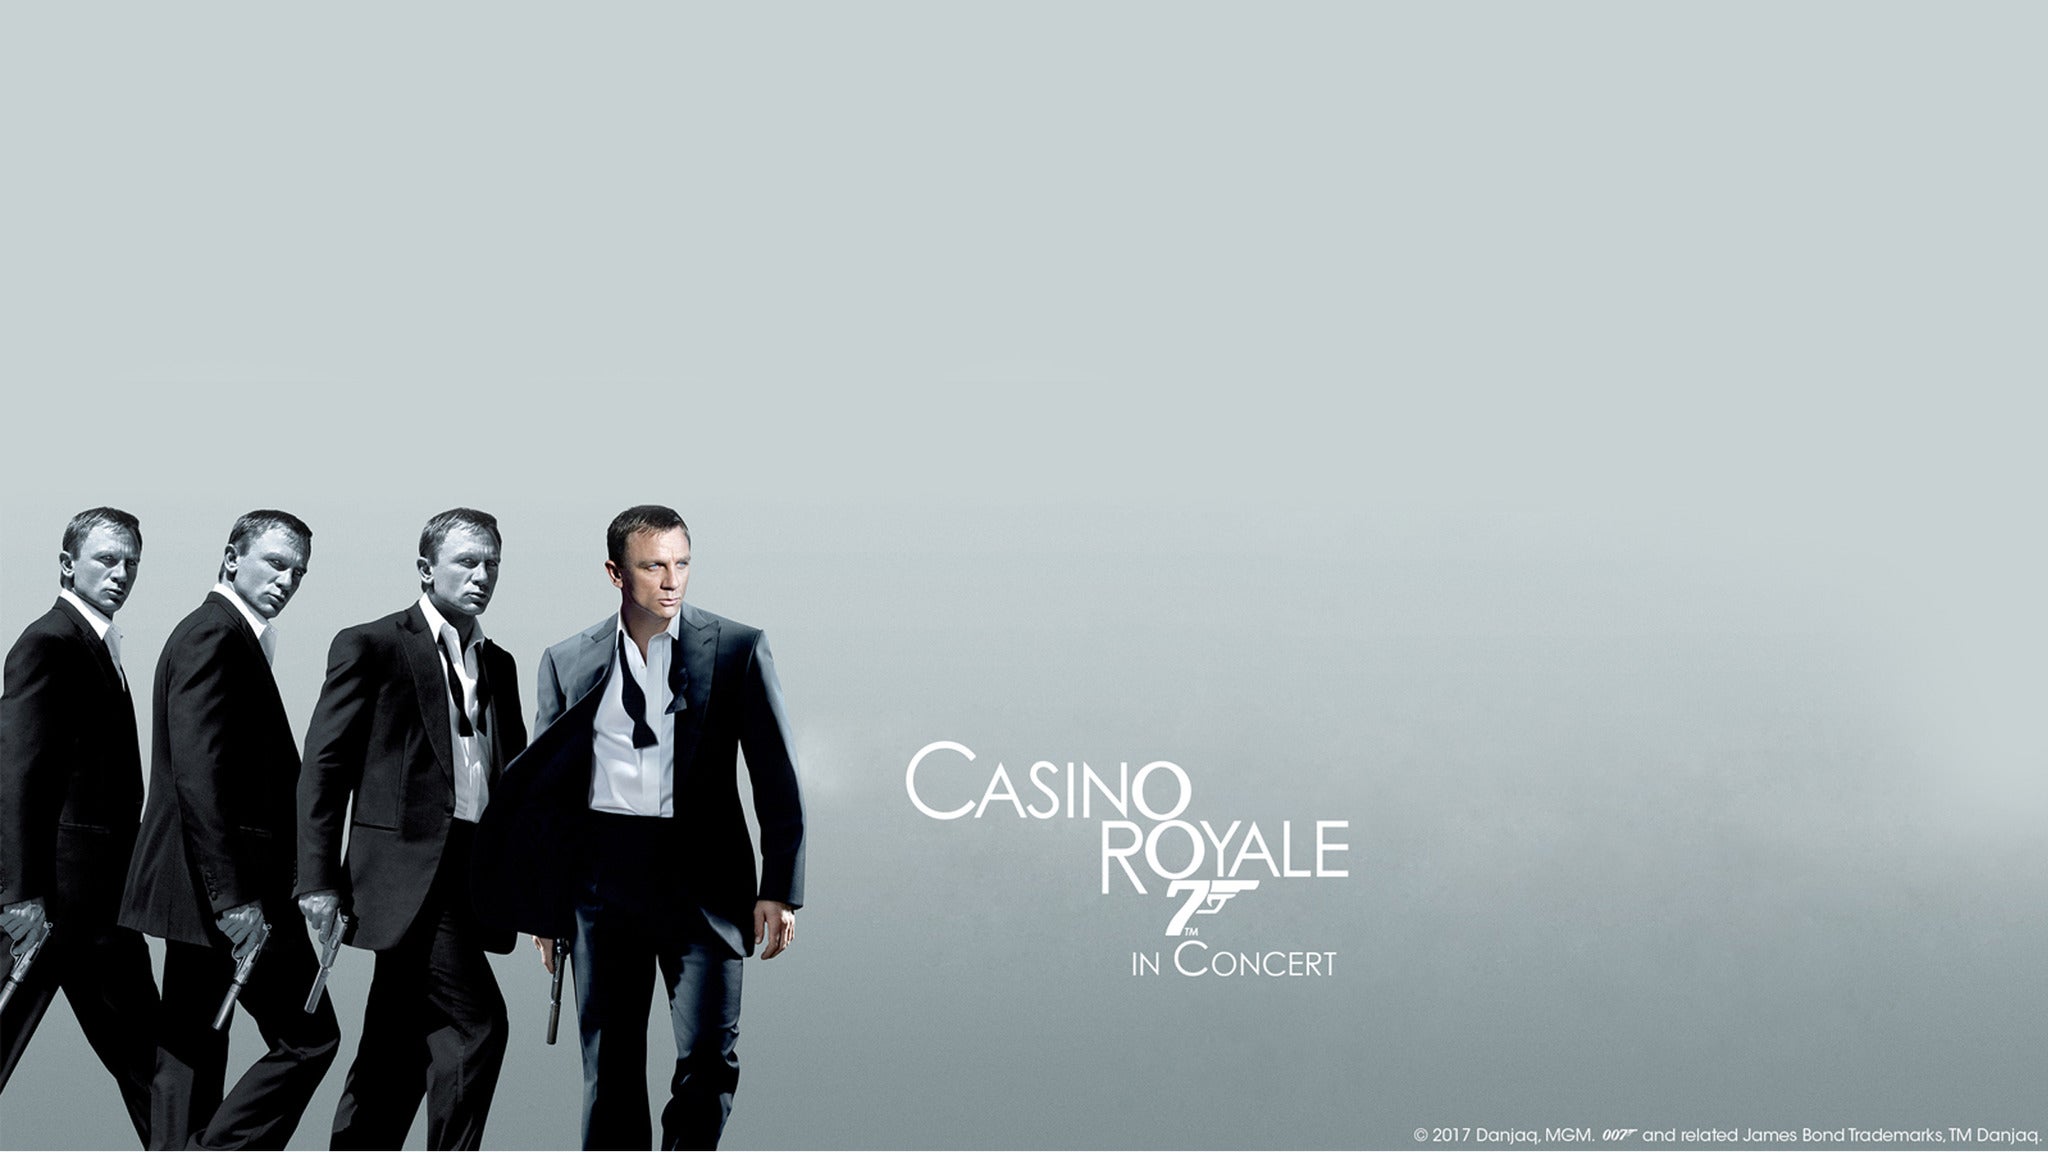 Image used with permission from Ticketmaster | Casino Royale in Concert tickets